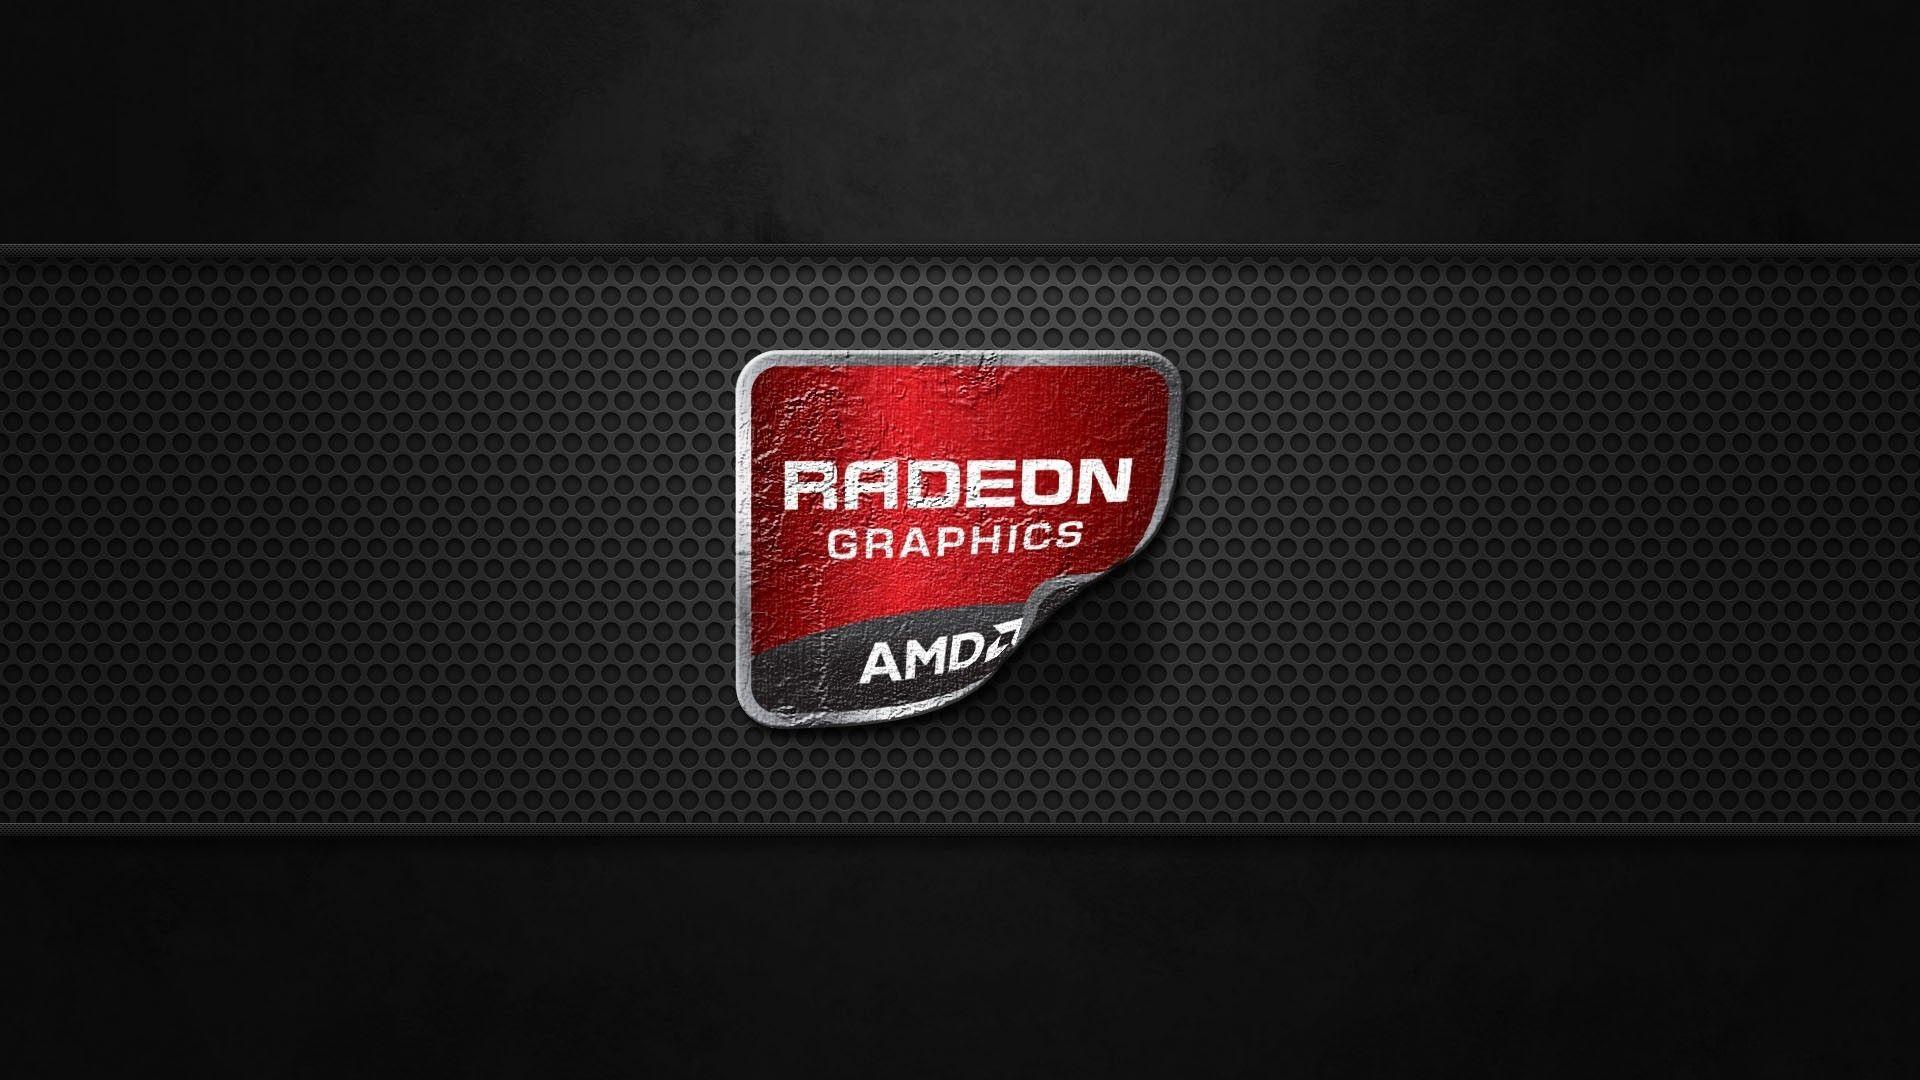 Looking for some ATI or AMD wallpaper